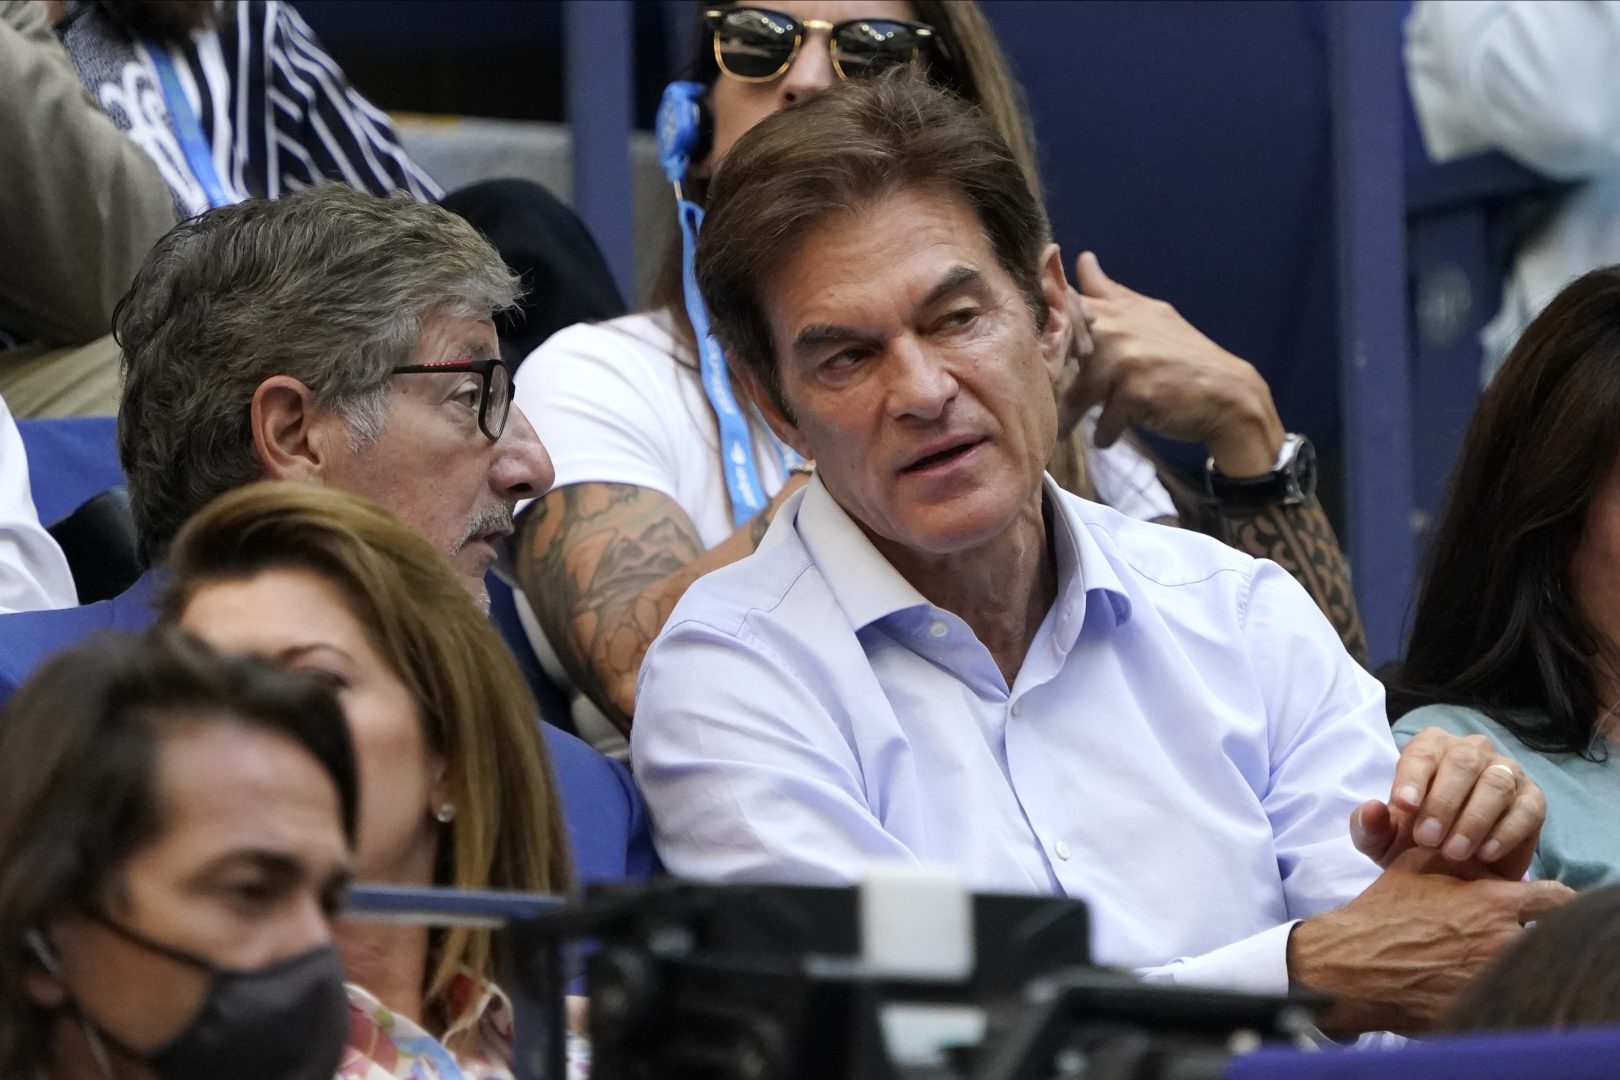 Dr. Oz, right, watches play between Emma Raducanu, of Britain, and Leylah Fernandez, of Canada, during the women's singles final of the US Open tennis championships, Saturday, Sept. 11, 2021, in New York.